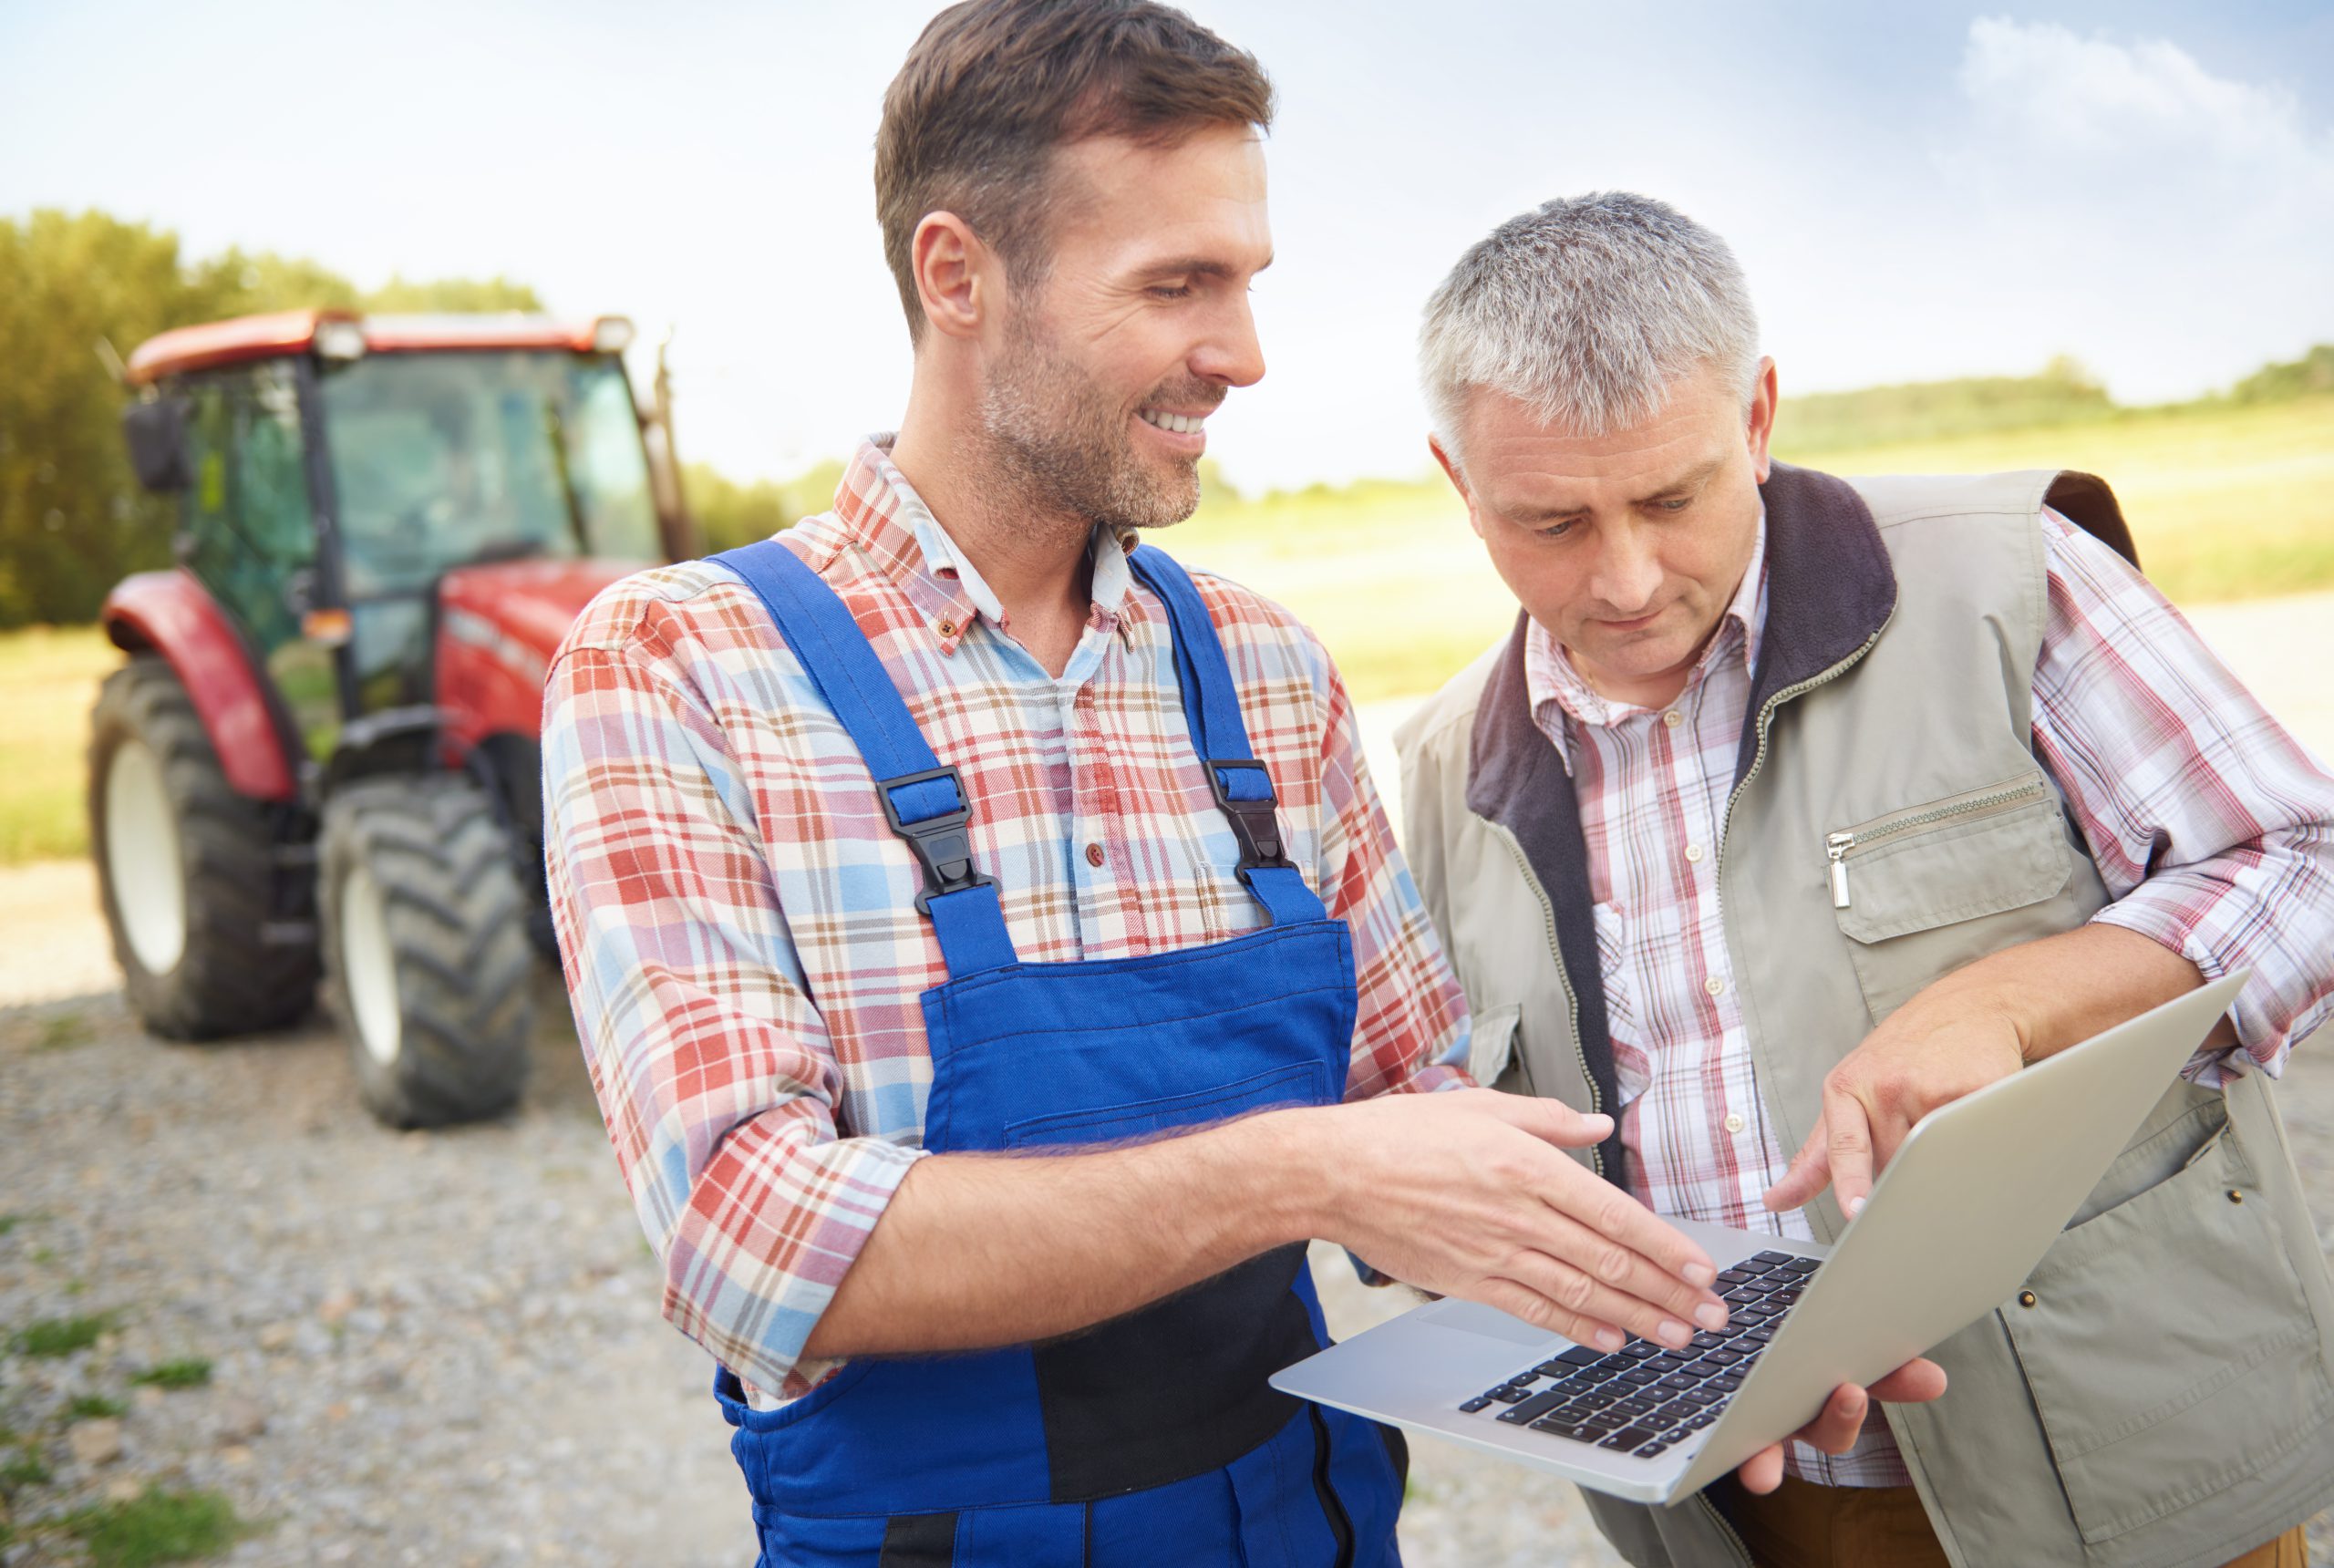 Agriculture sees the wave of digitization offering a digital yield.